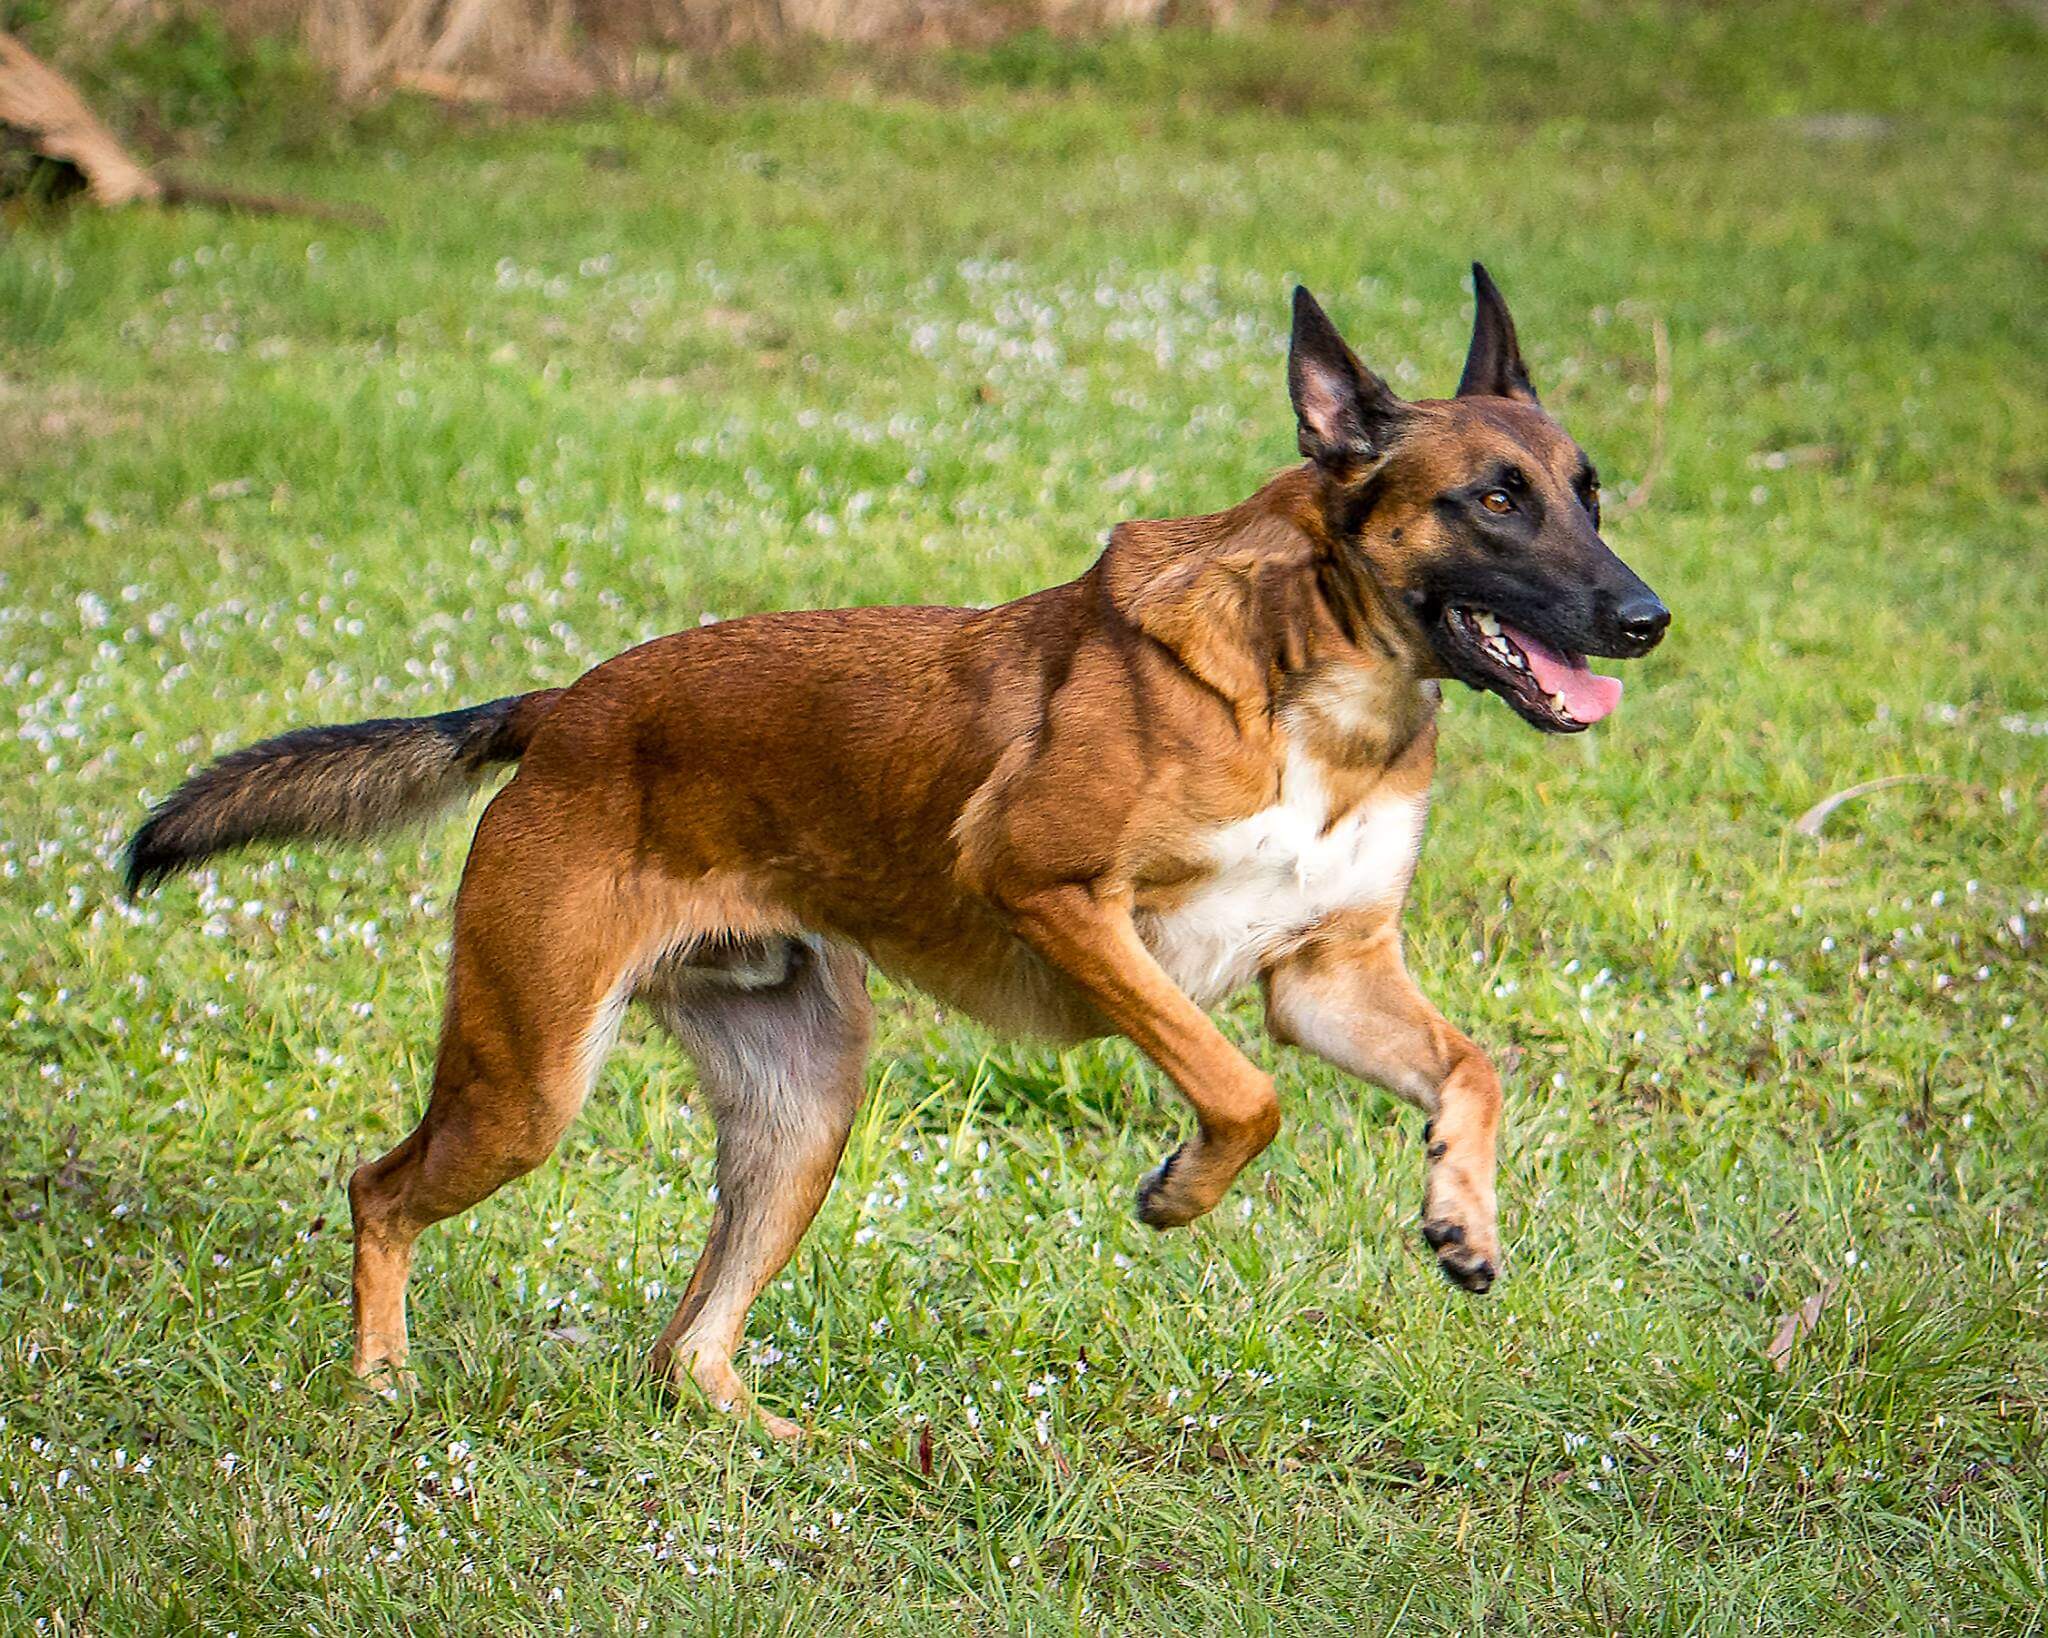 Protection dog running through the grass